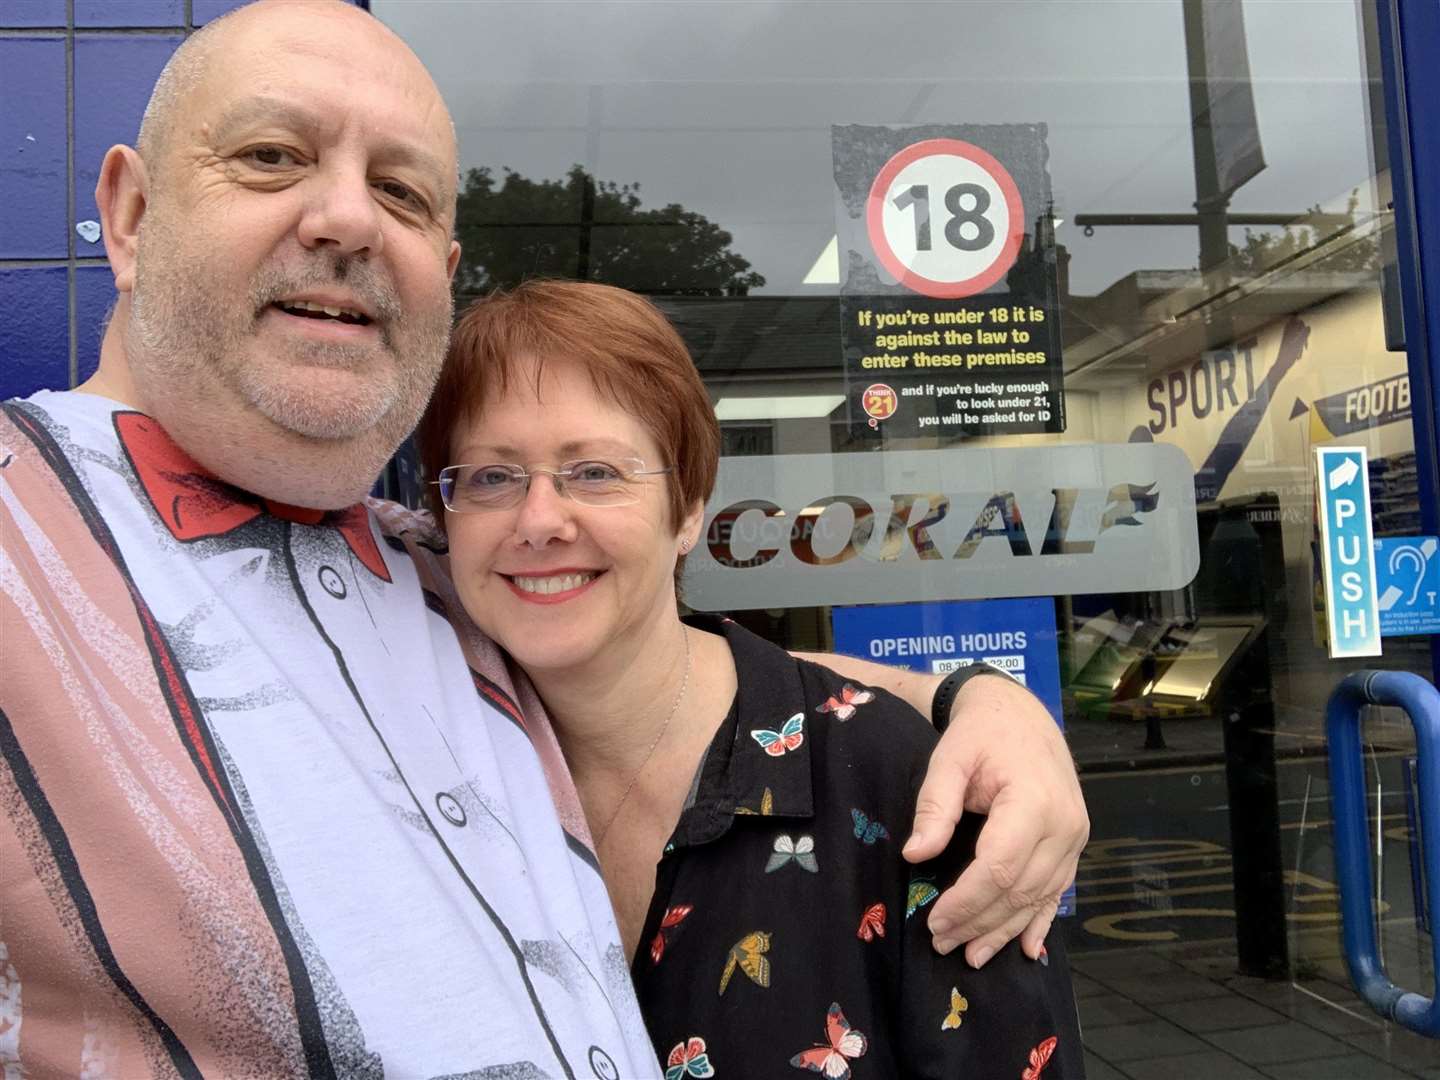 The couple spent celebrated their coral anniversary at a Coral bookies. Picture: South West News Service (16052495)